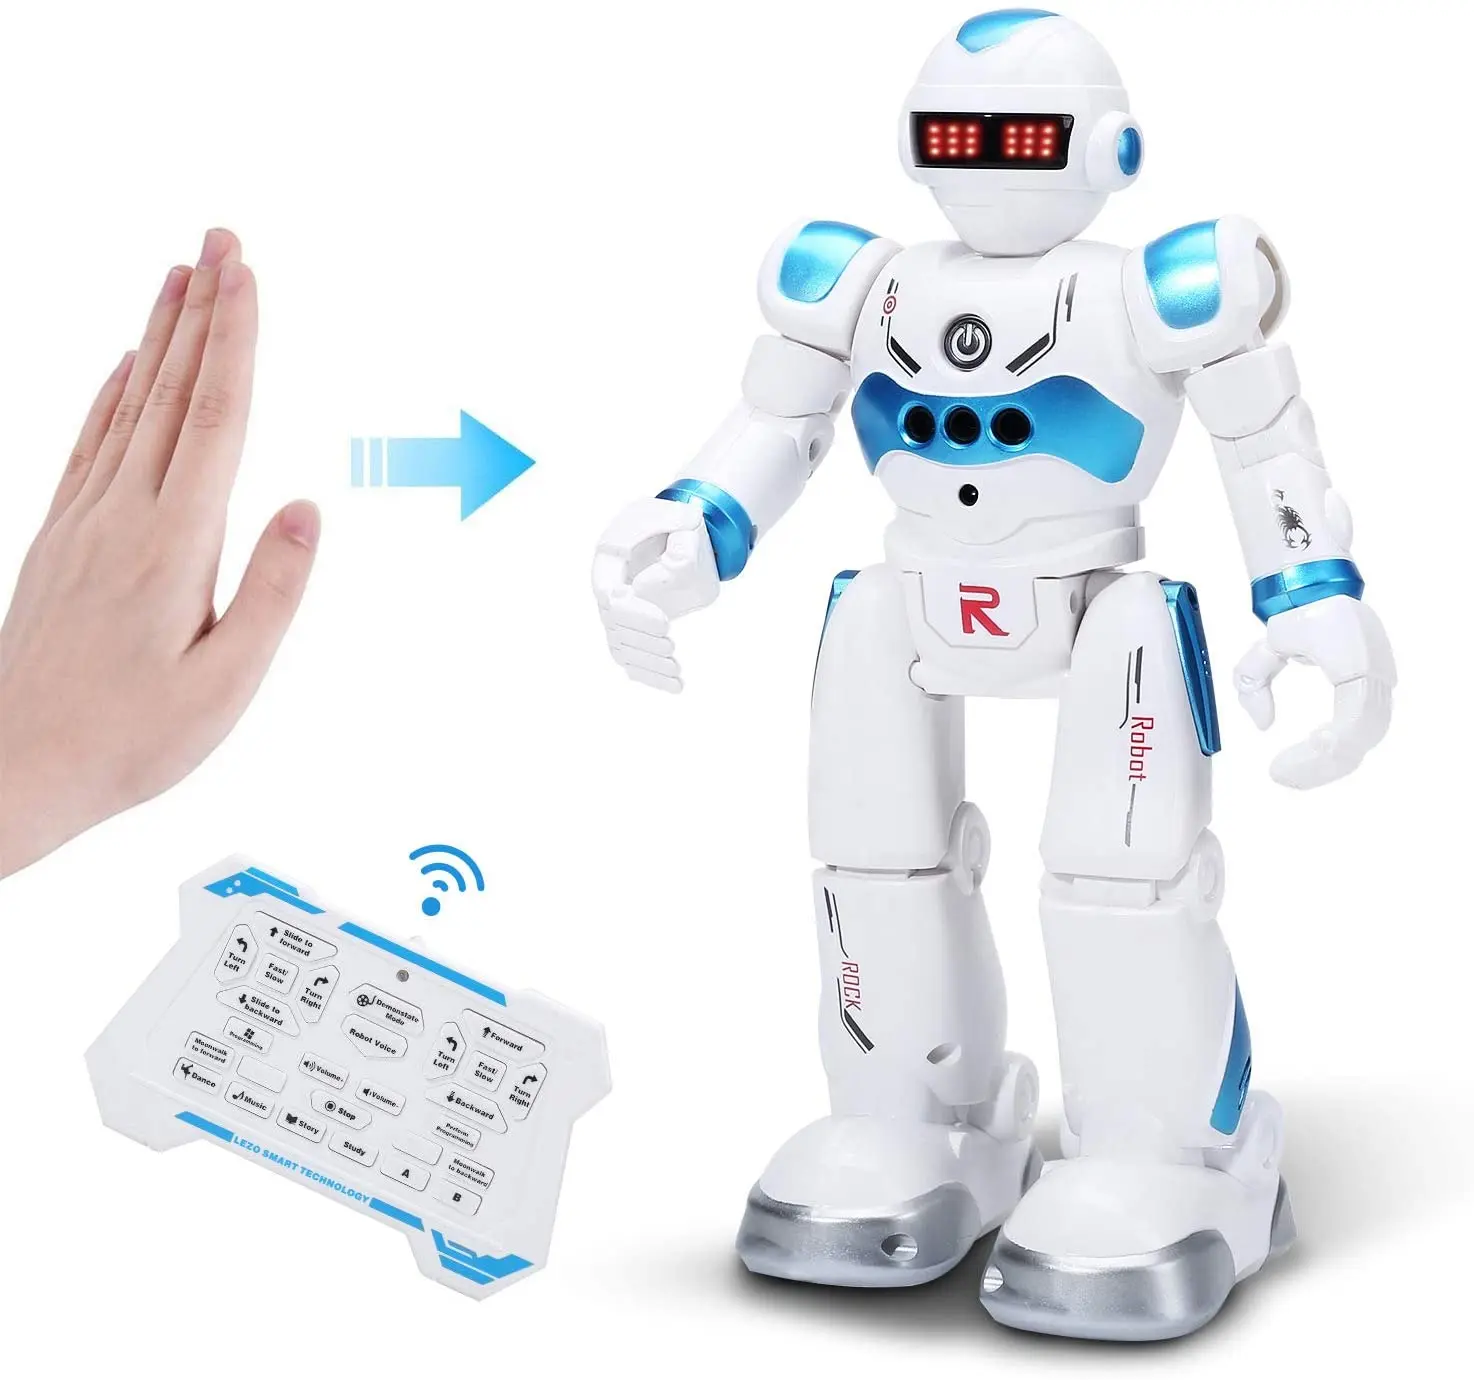 Suliper Intellectual Programmable Robot for Kids Remote Control Robot with Infrared Controller Early Education Robot Toys Can Dance Sing Walk Slide-Walk Robot Kits for Children Birthday Gifts 